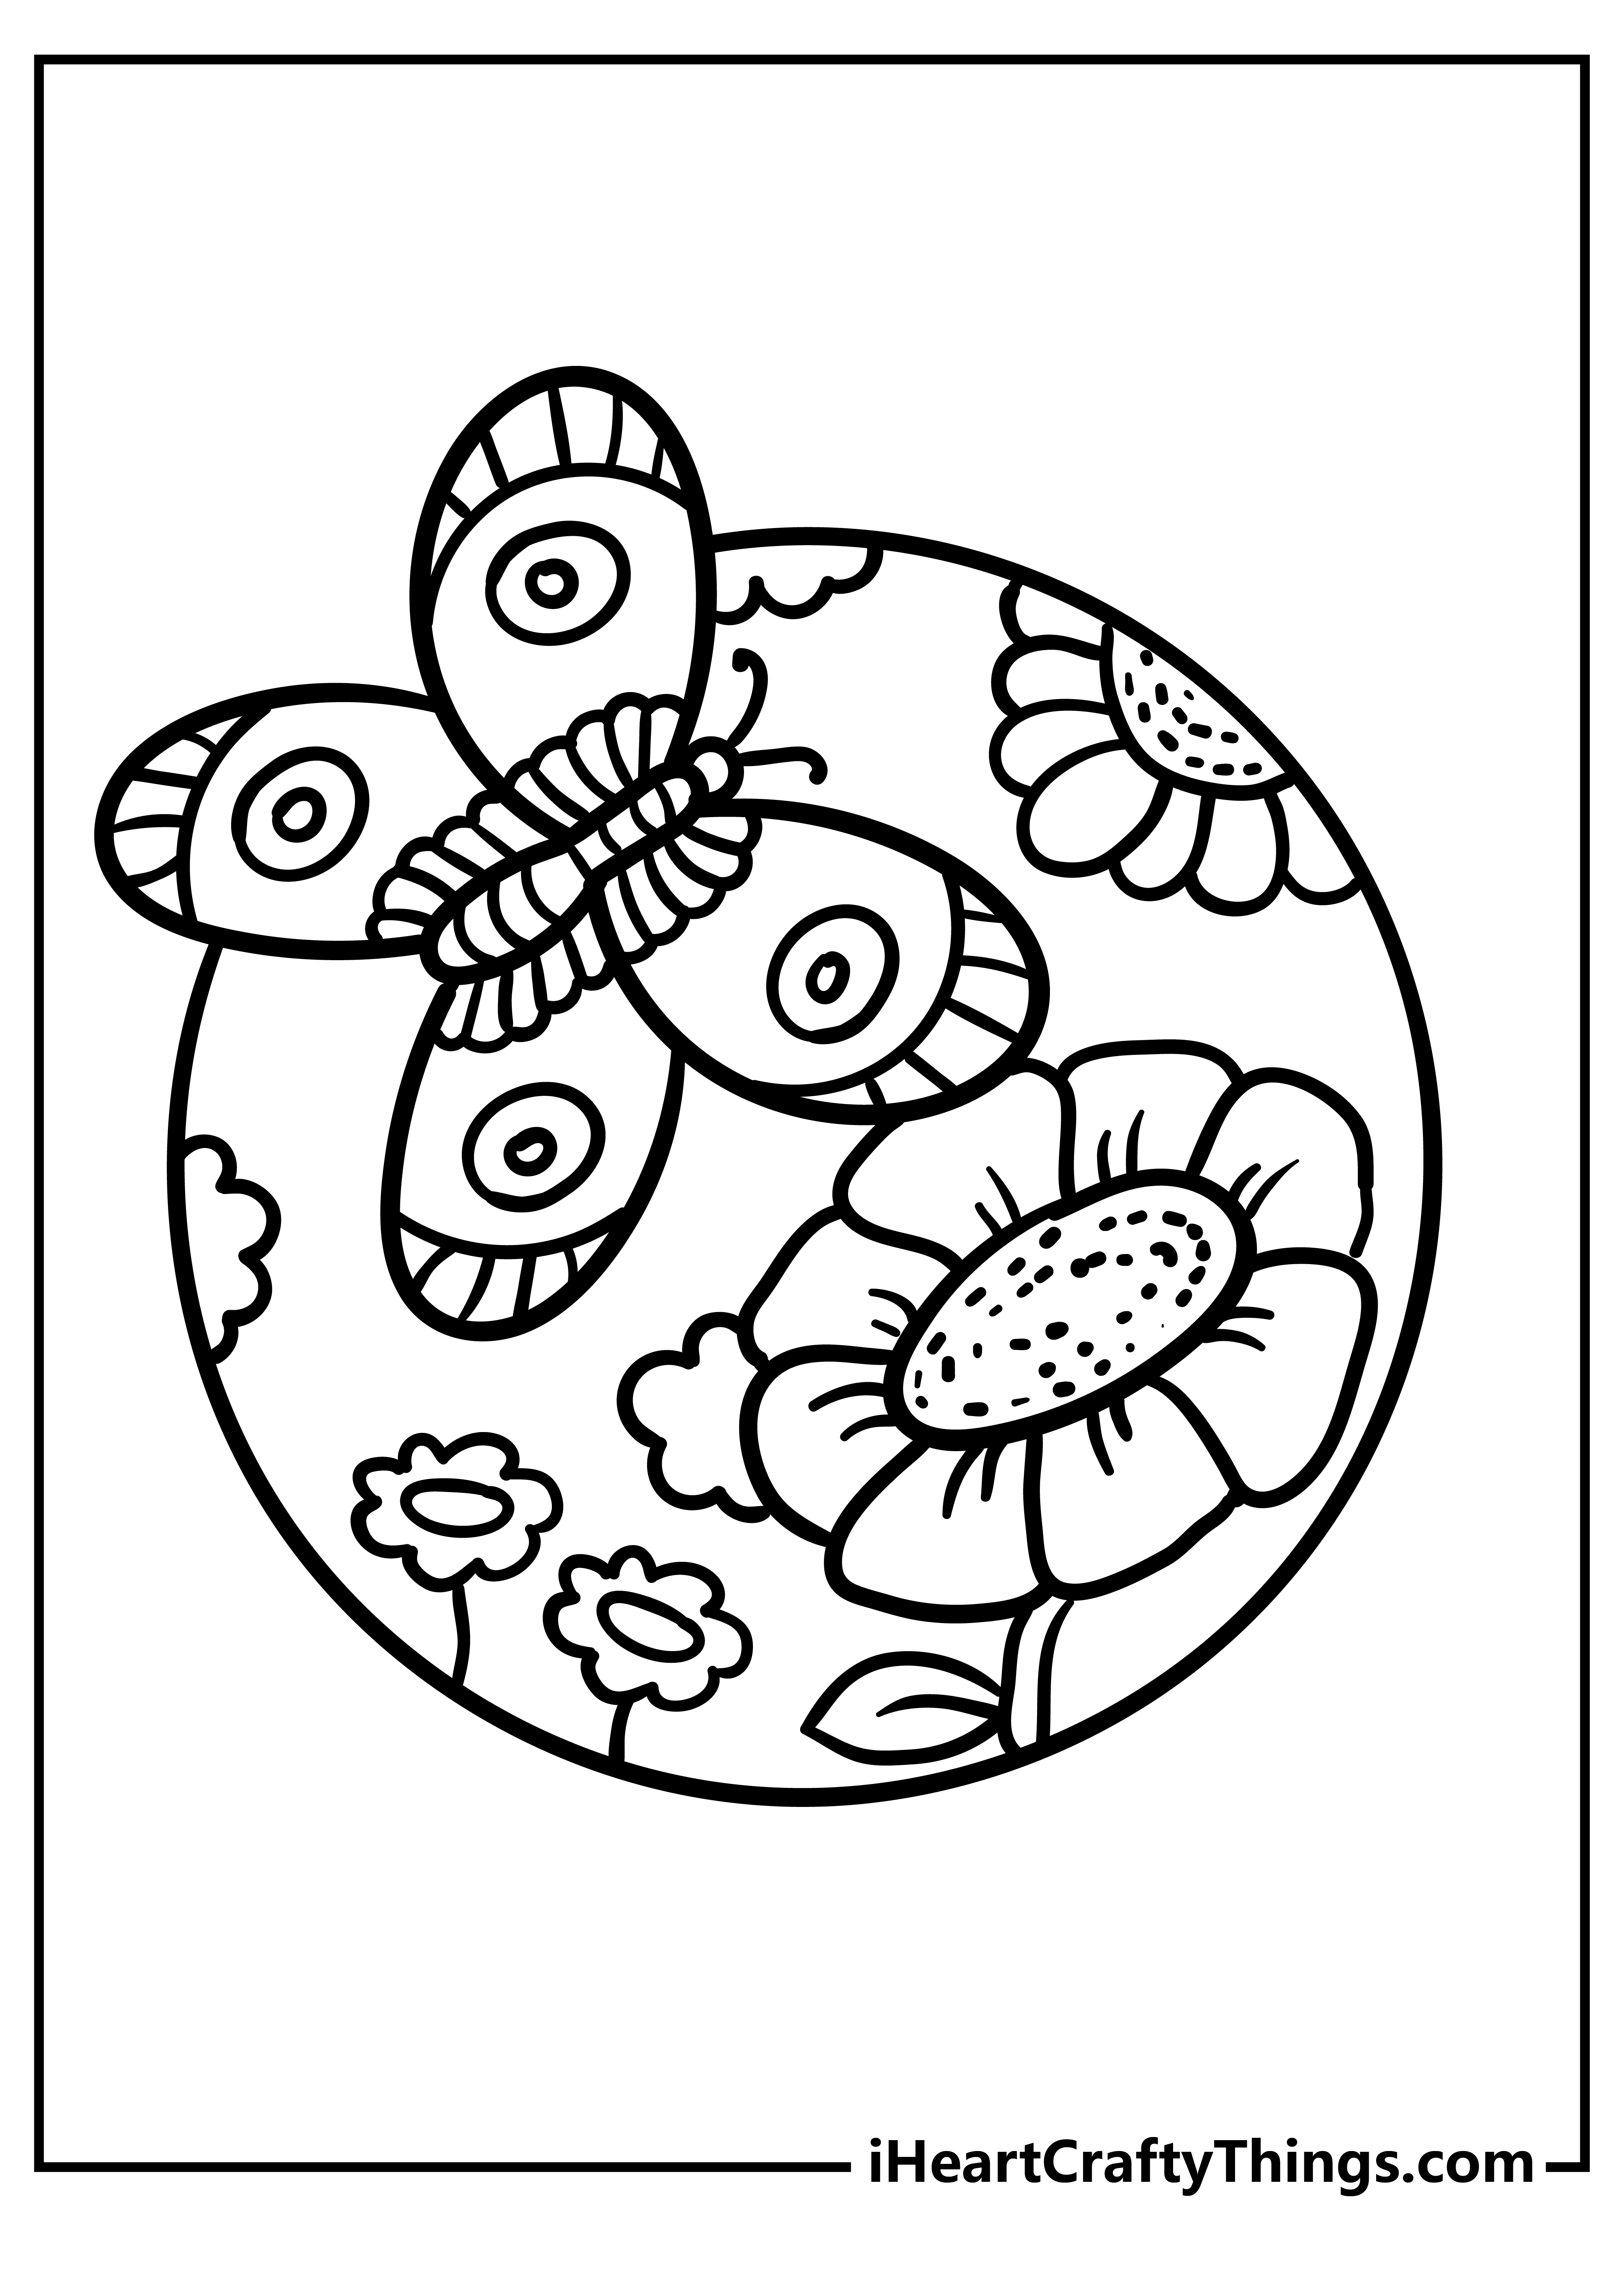 Outer Space Coloring Pages for Kids: Free Printable Coloring Pages